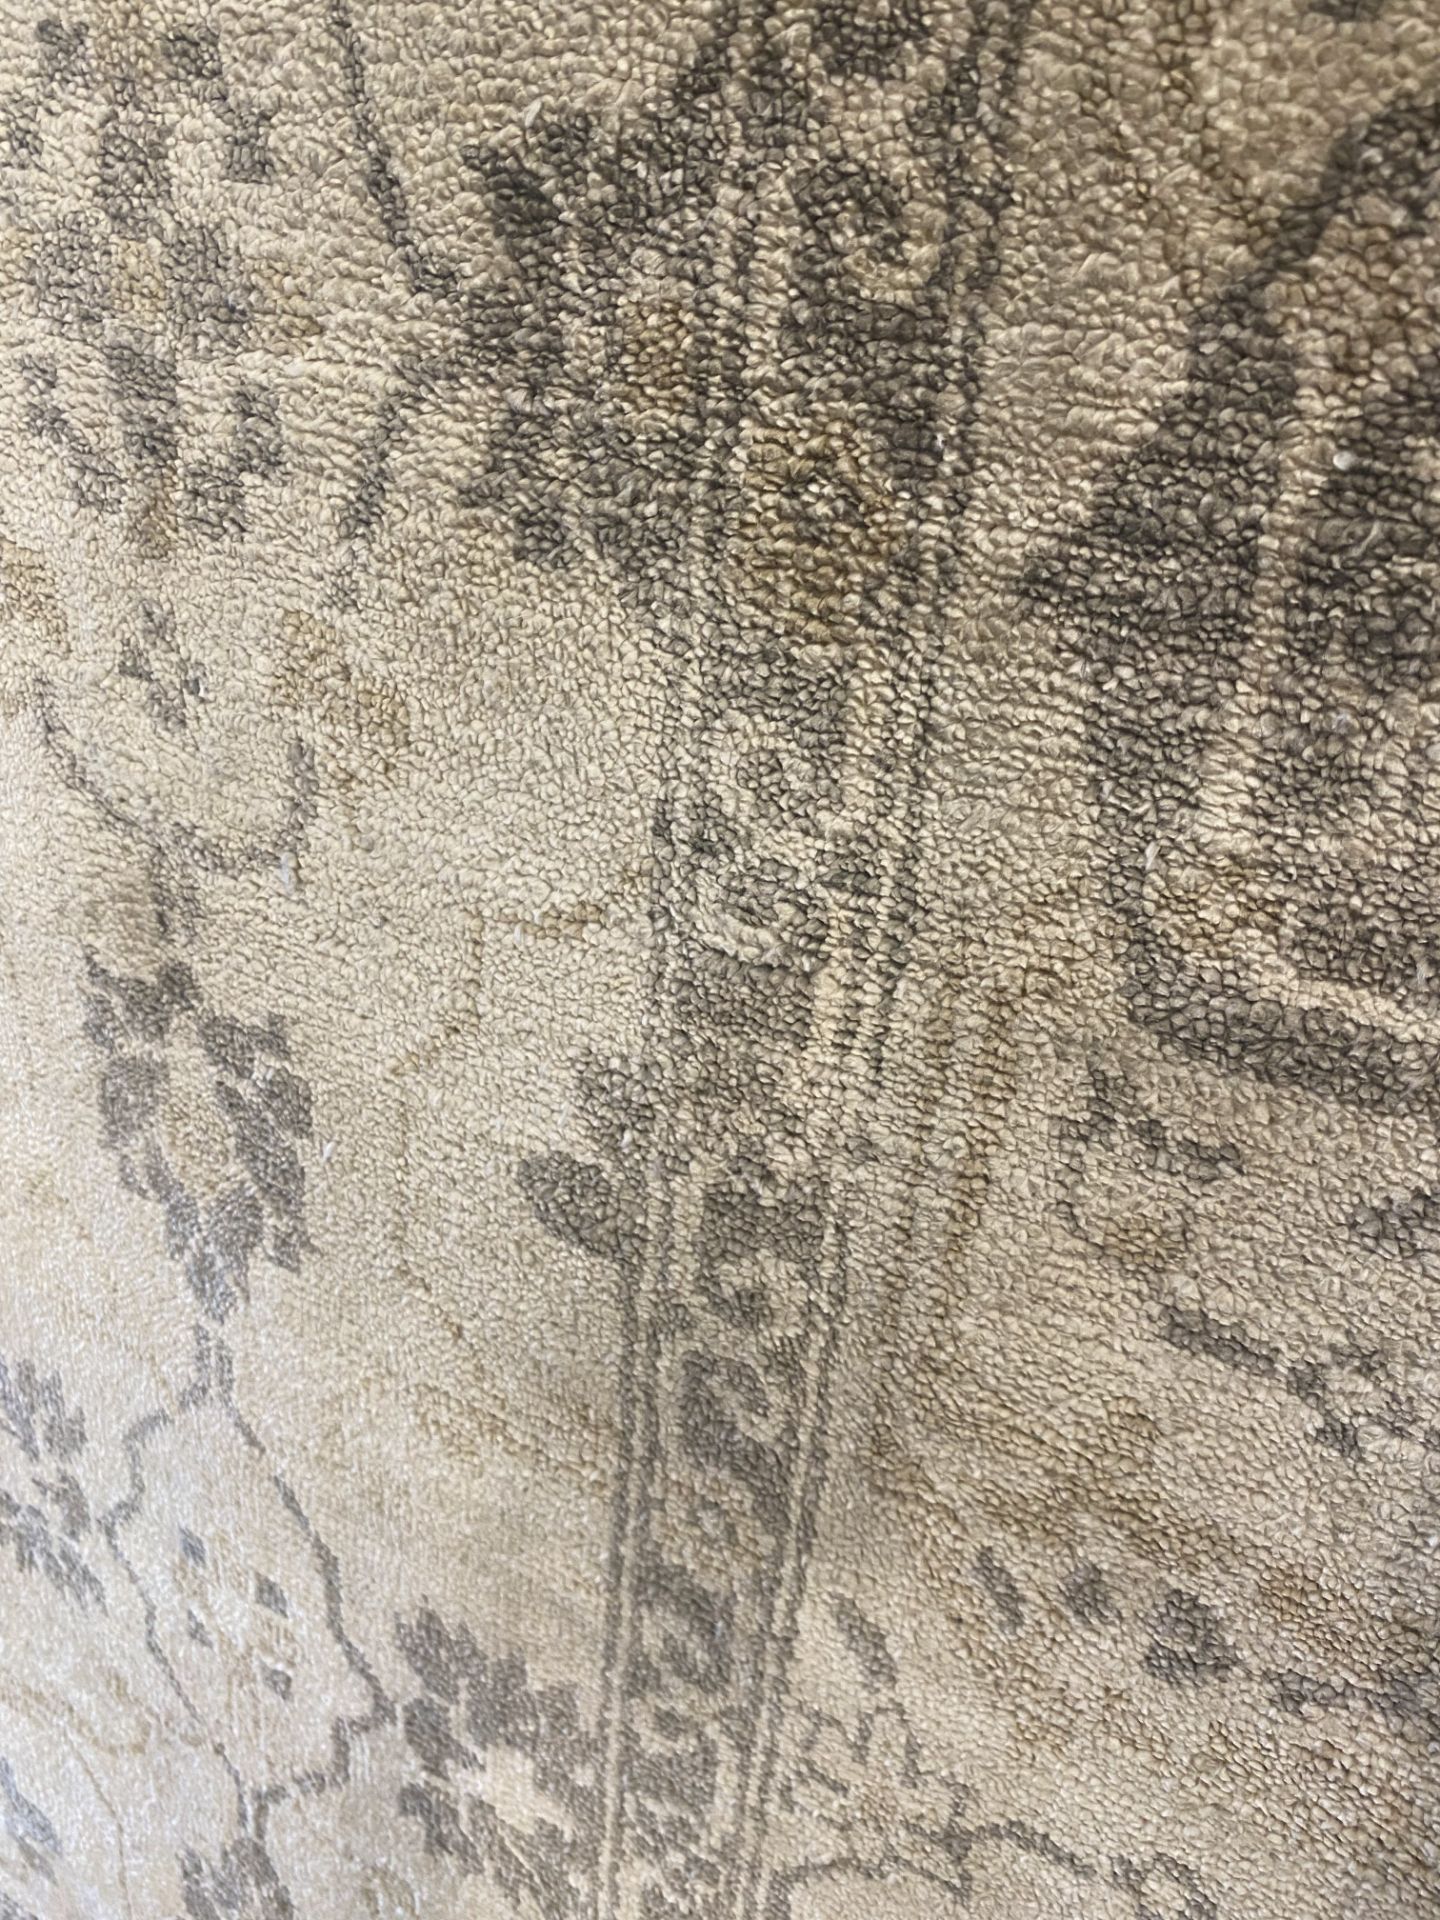 6' X 9' A.SILK HAND KNOTTED IN INDIA - MSRP $3,999.00 - INVENTORY CODE: DREAM 216142 IV/GRY (LOT - Image 2 of 3